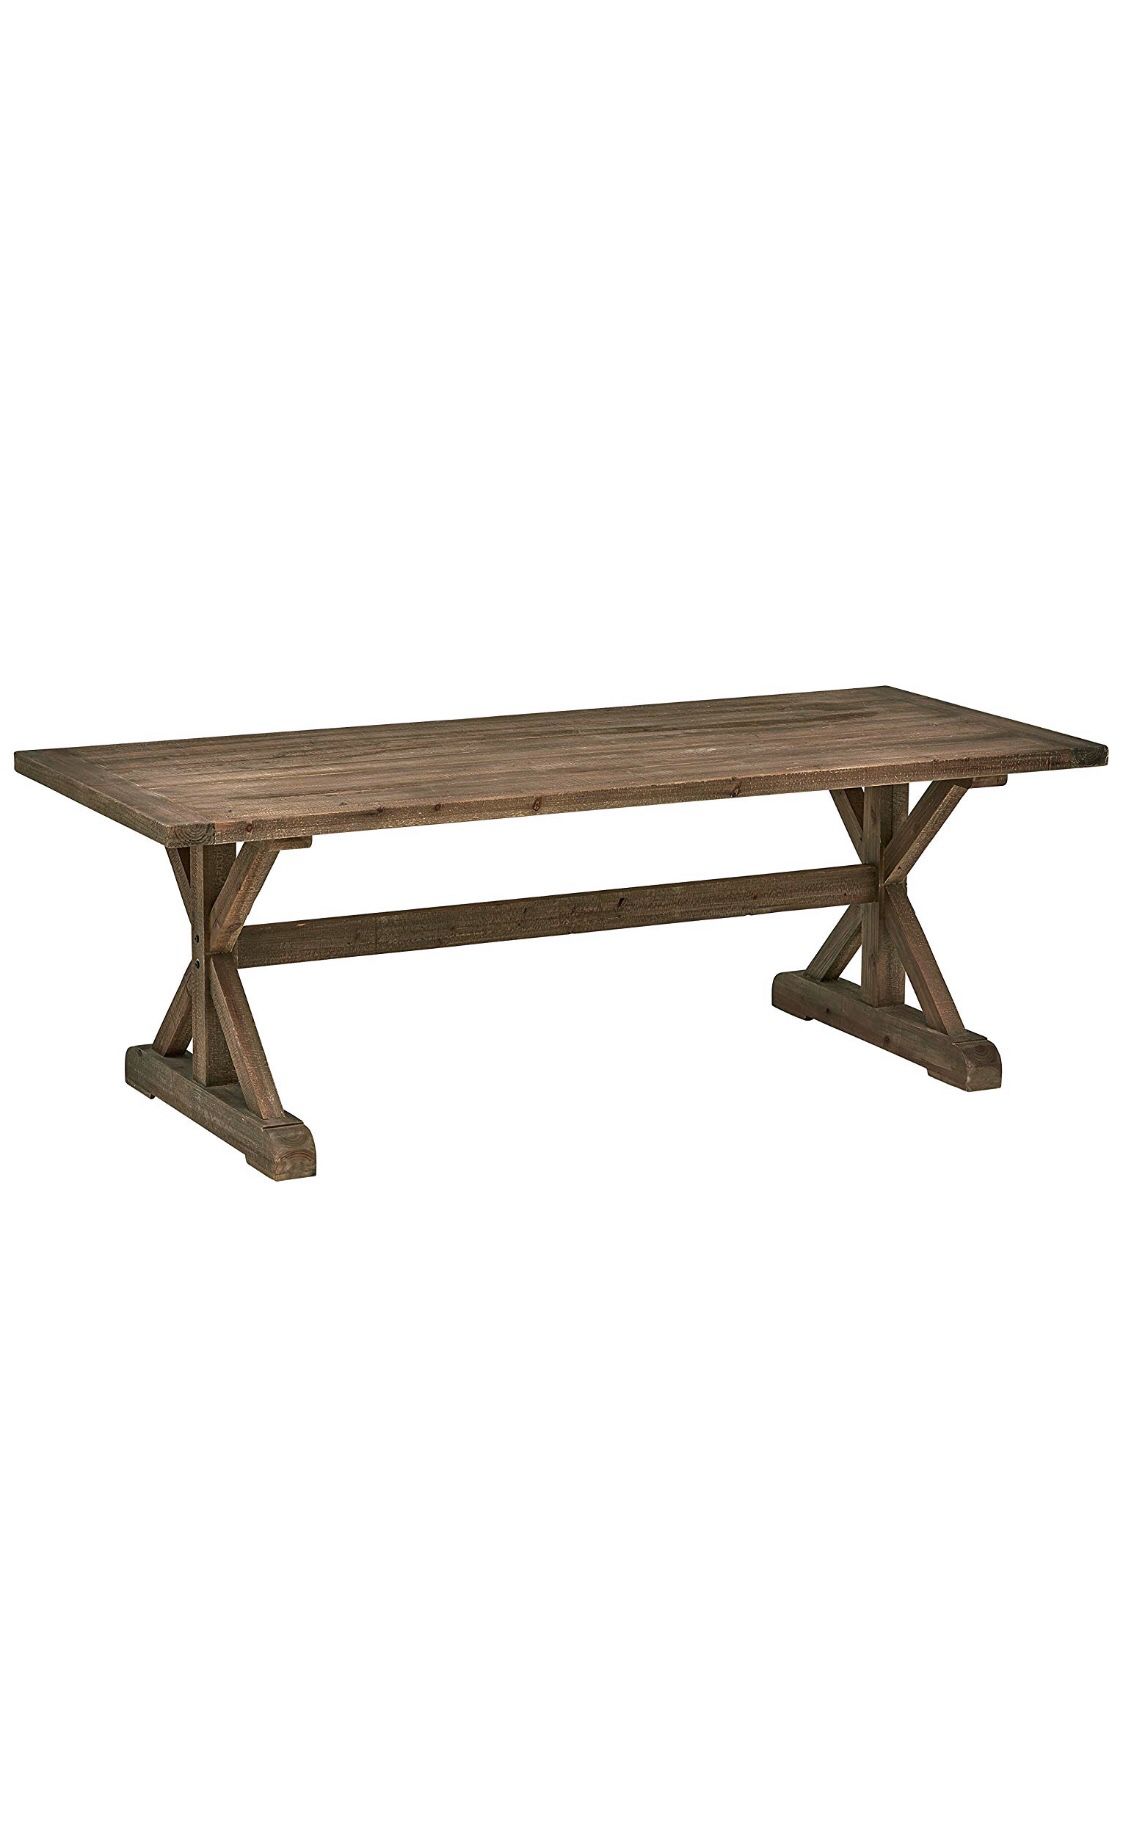 Solid Wood Rustic Farmhouse Dining Table